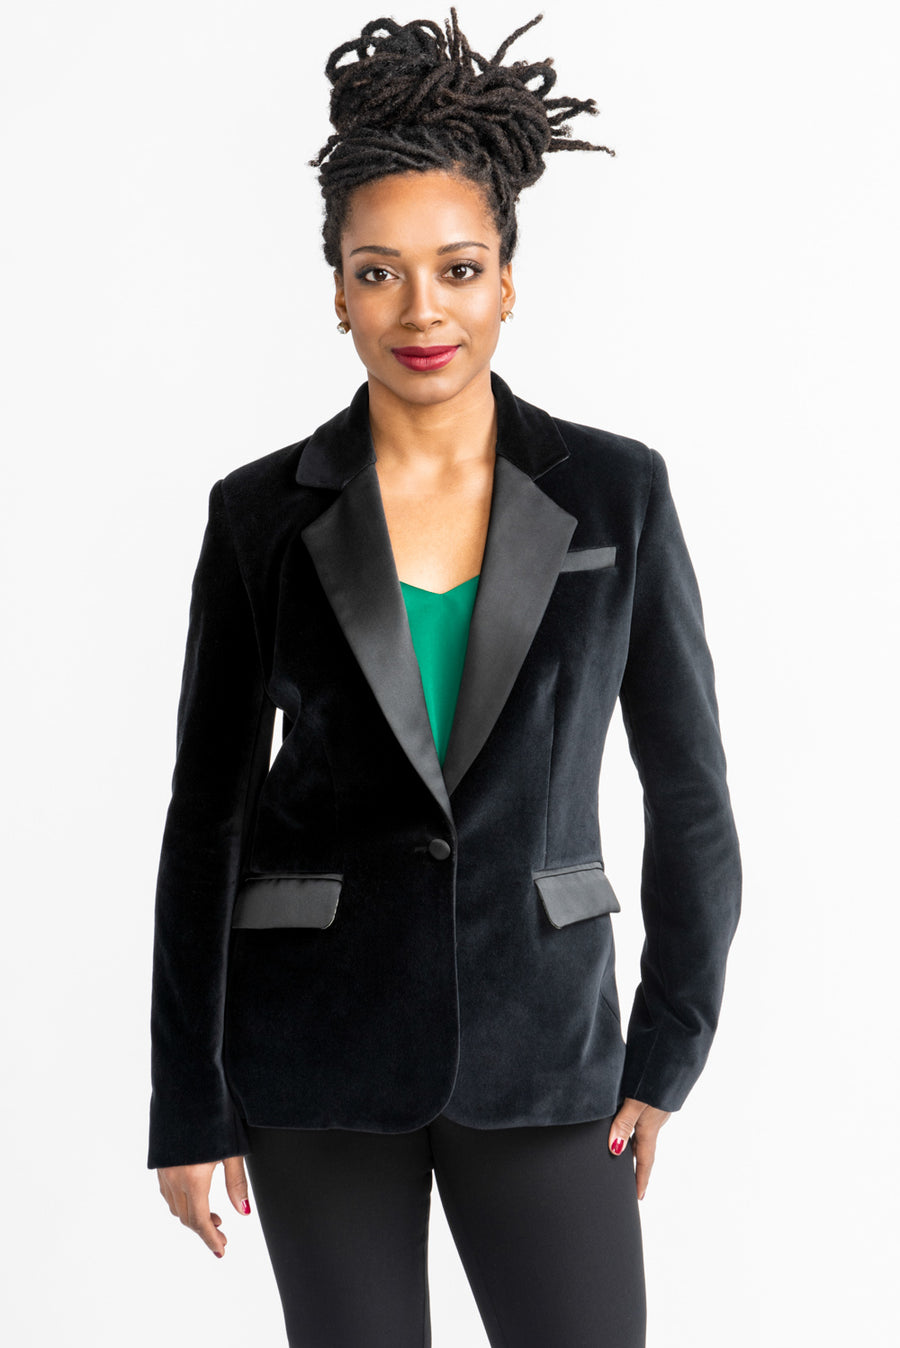 Ask a stylist: how do I find a jacket that suits my shape?